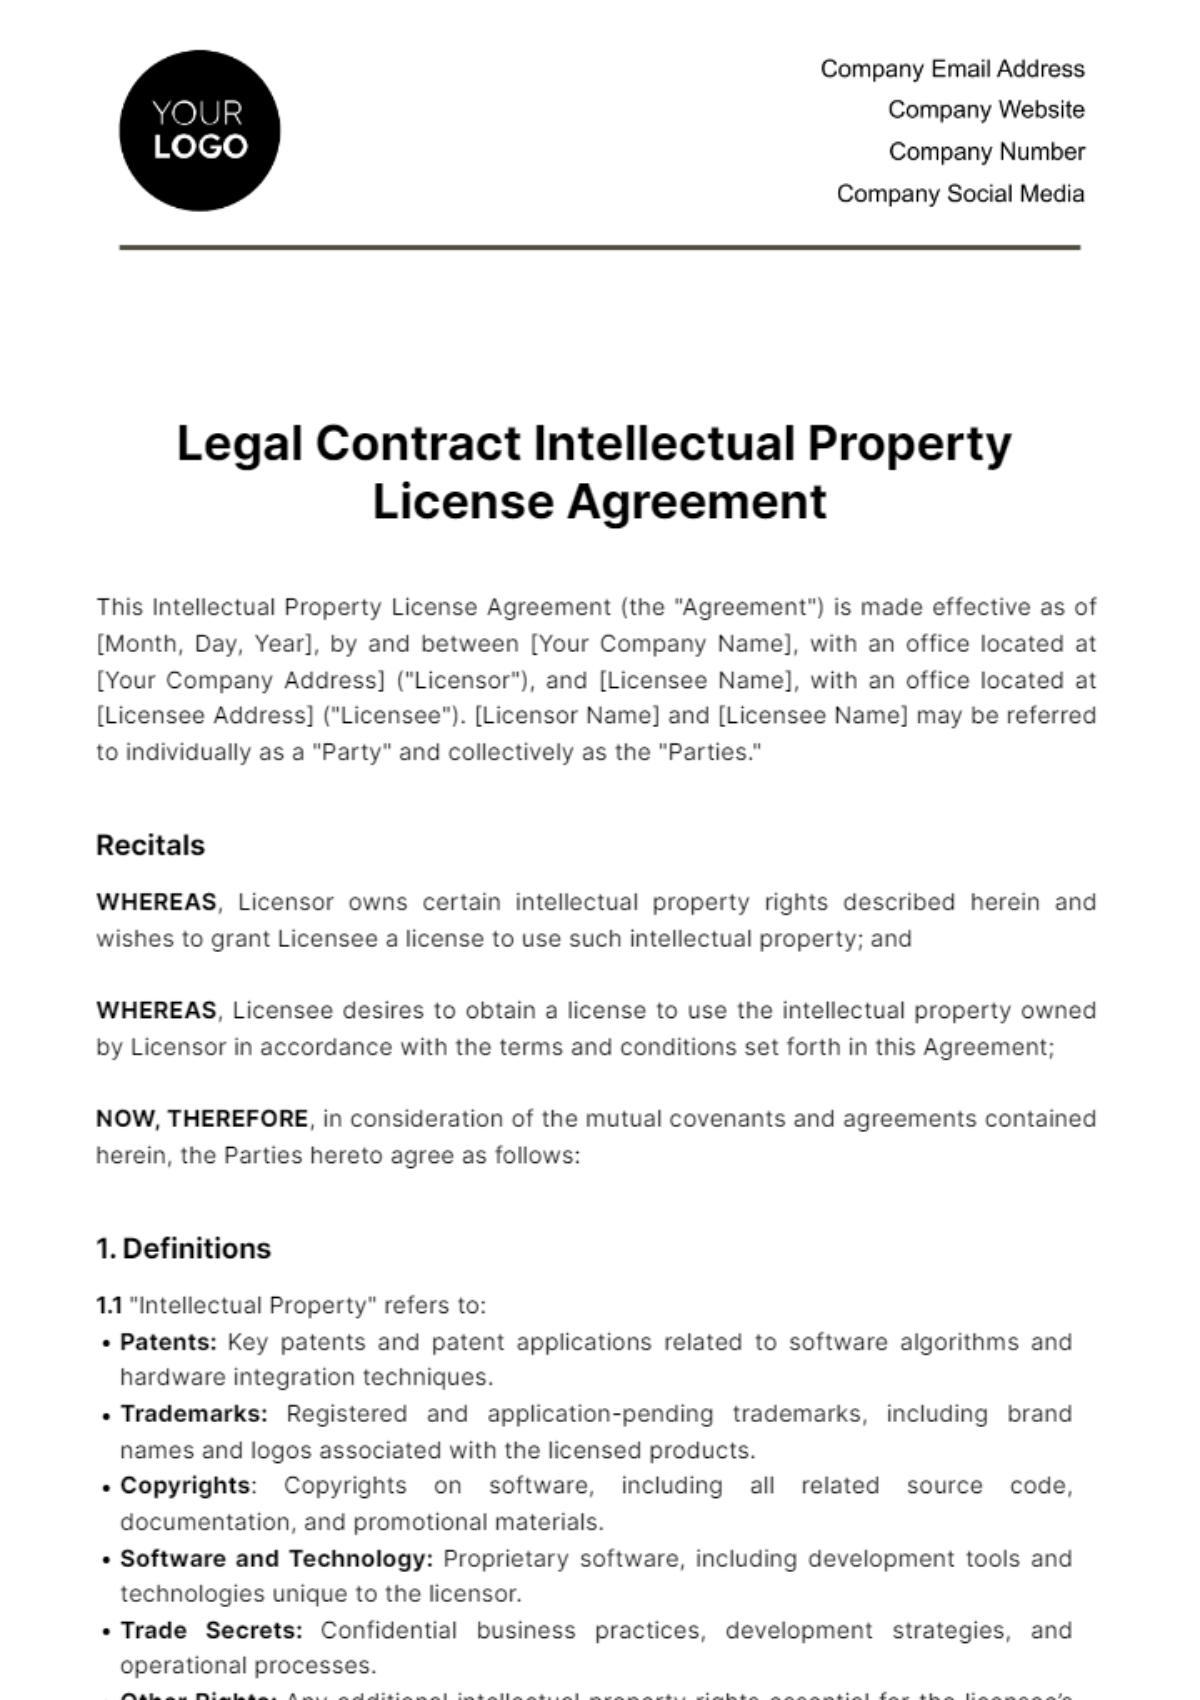 Legal Contract  Intellectual Property License Agreement Template